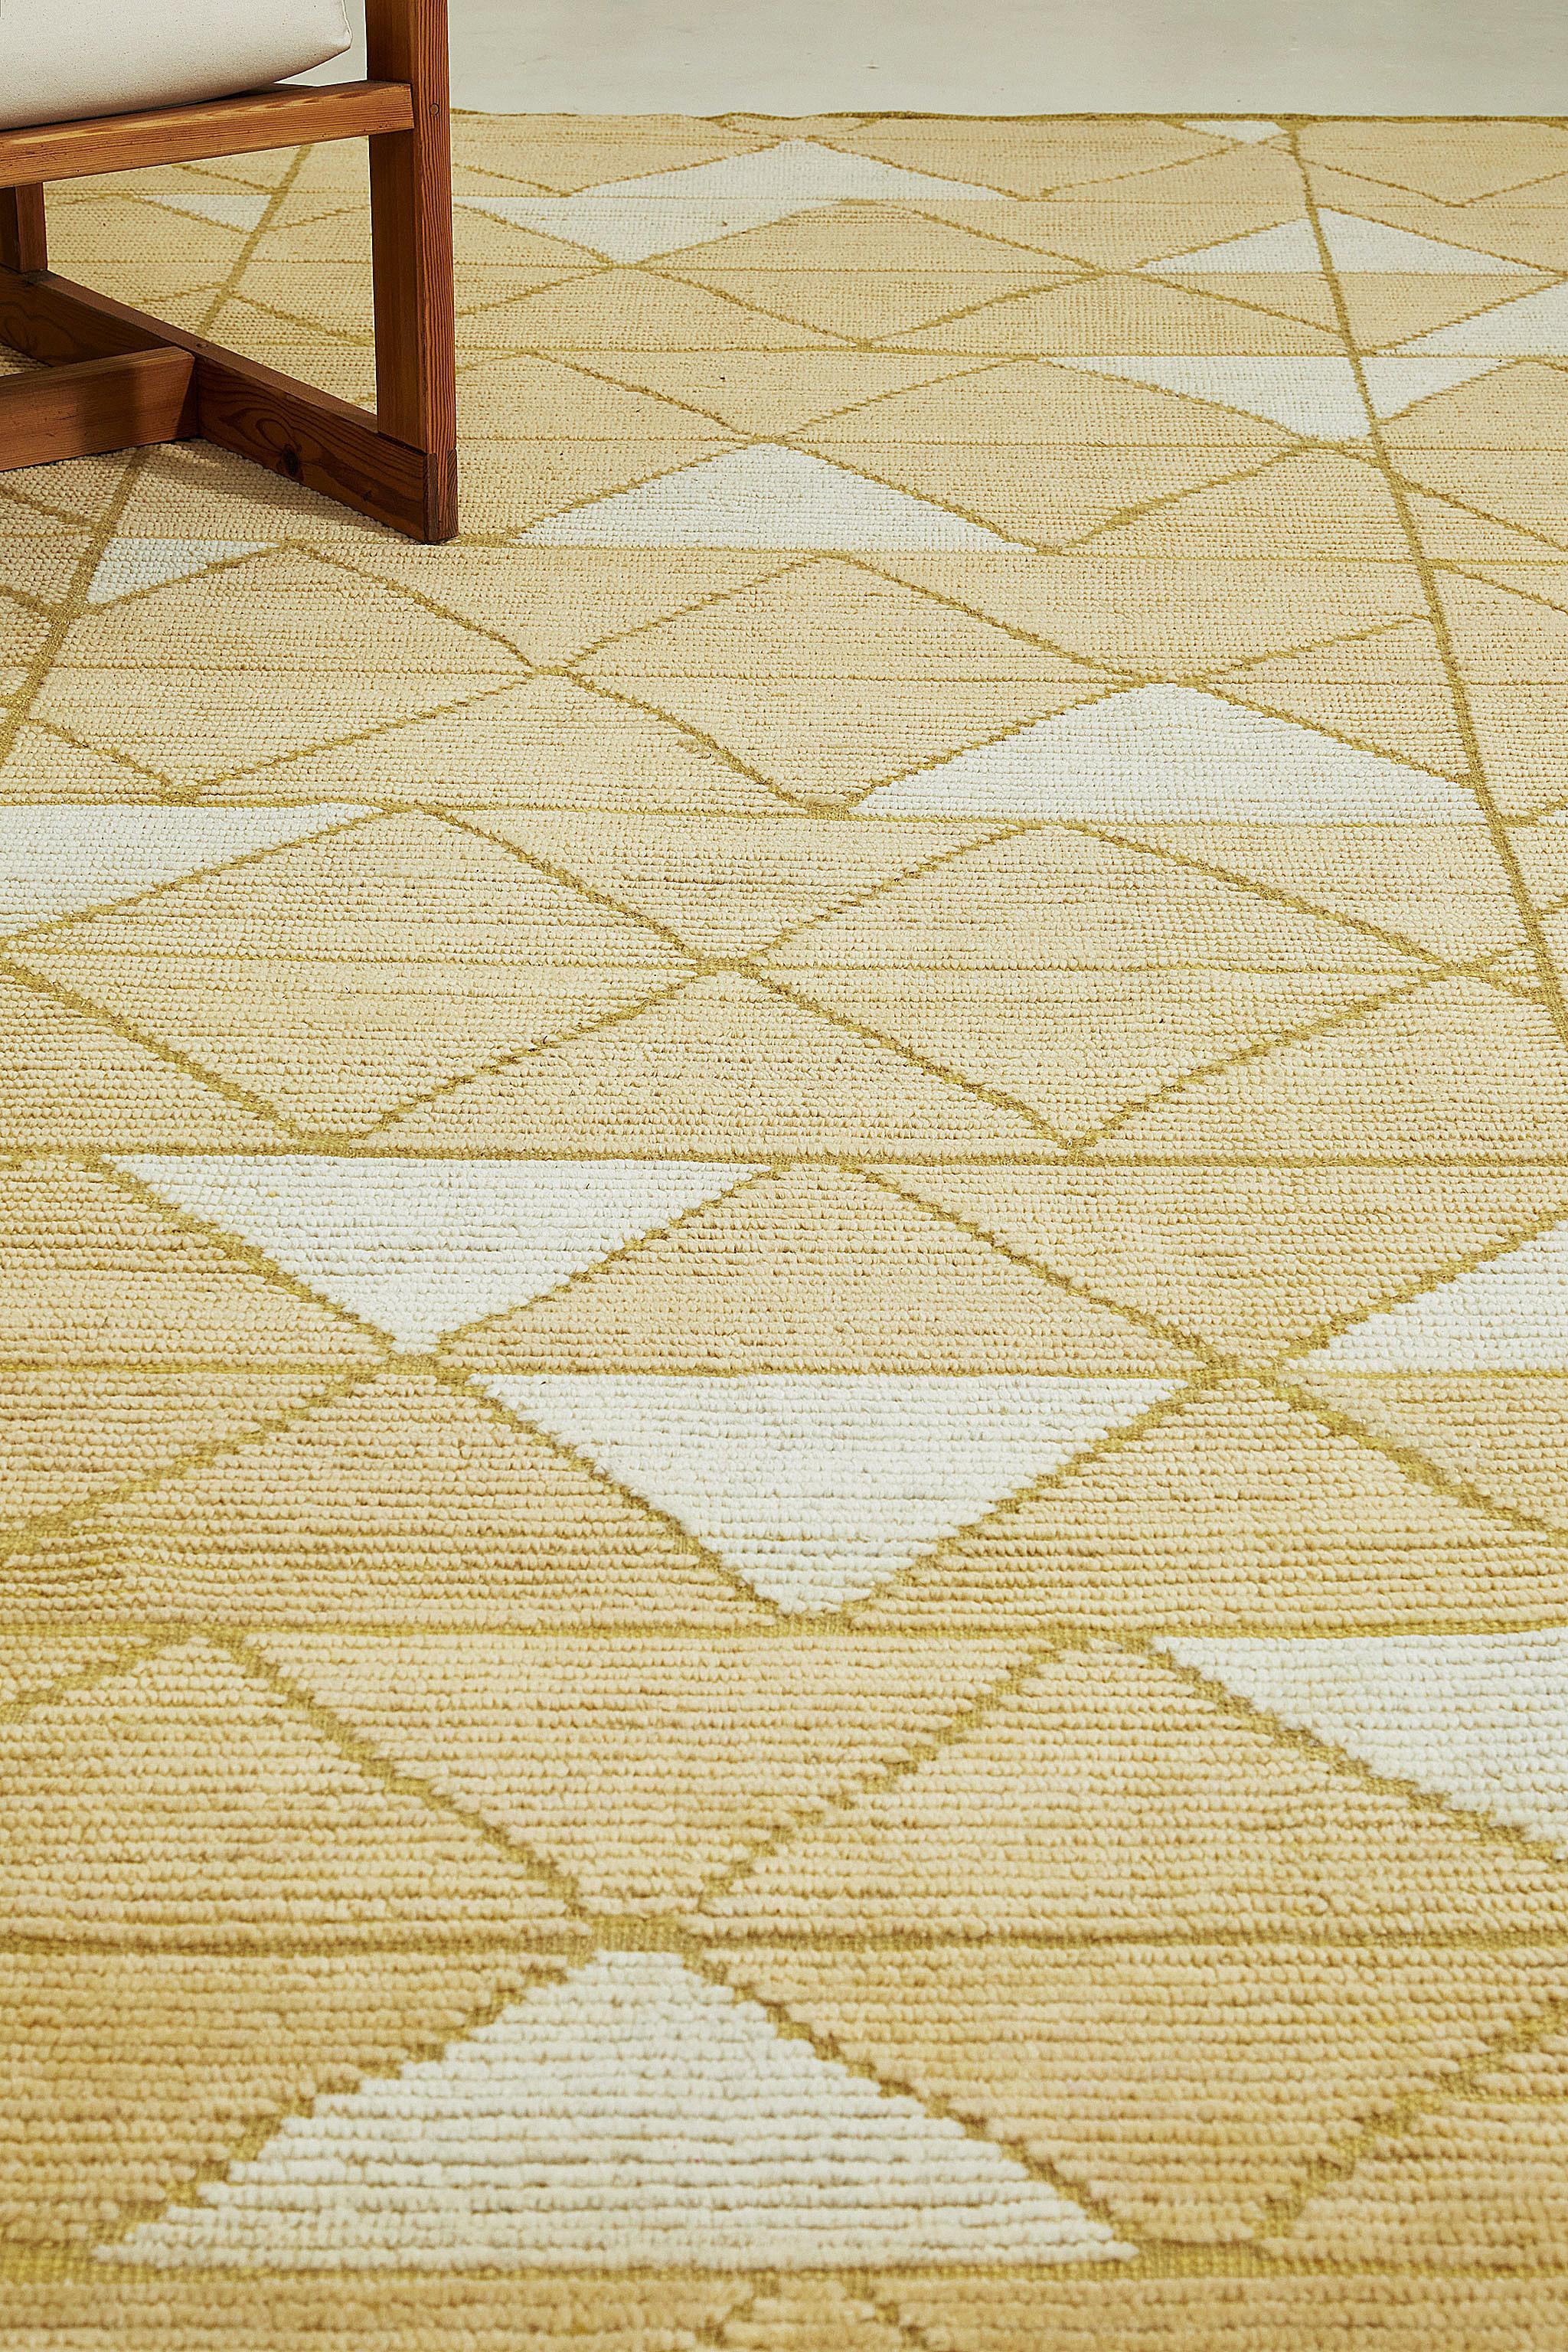 Pinotage’s triangle riff plays out in trim pile with contrasting flatweave lines.

Here in gold with ivory accents.

The Estancia Collection by Mehraban is a group of casually sophisticated rugs in a versatile array of upbeat colorways and design